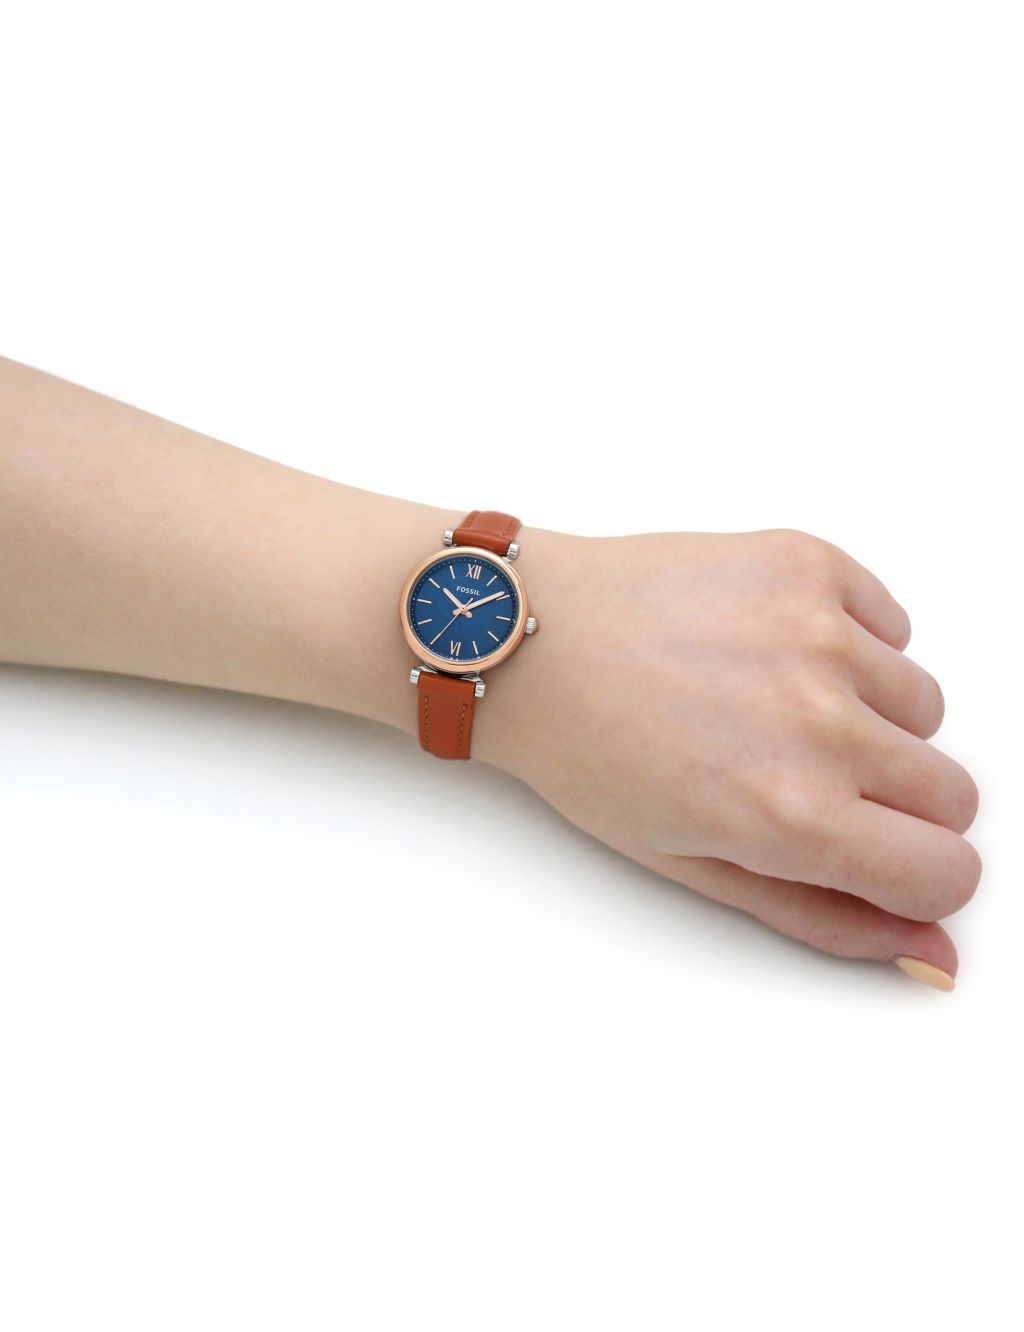 Fossil Carlie Brown Leather Watch image 2